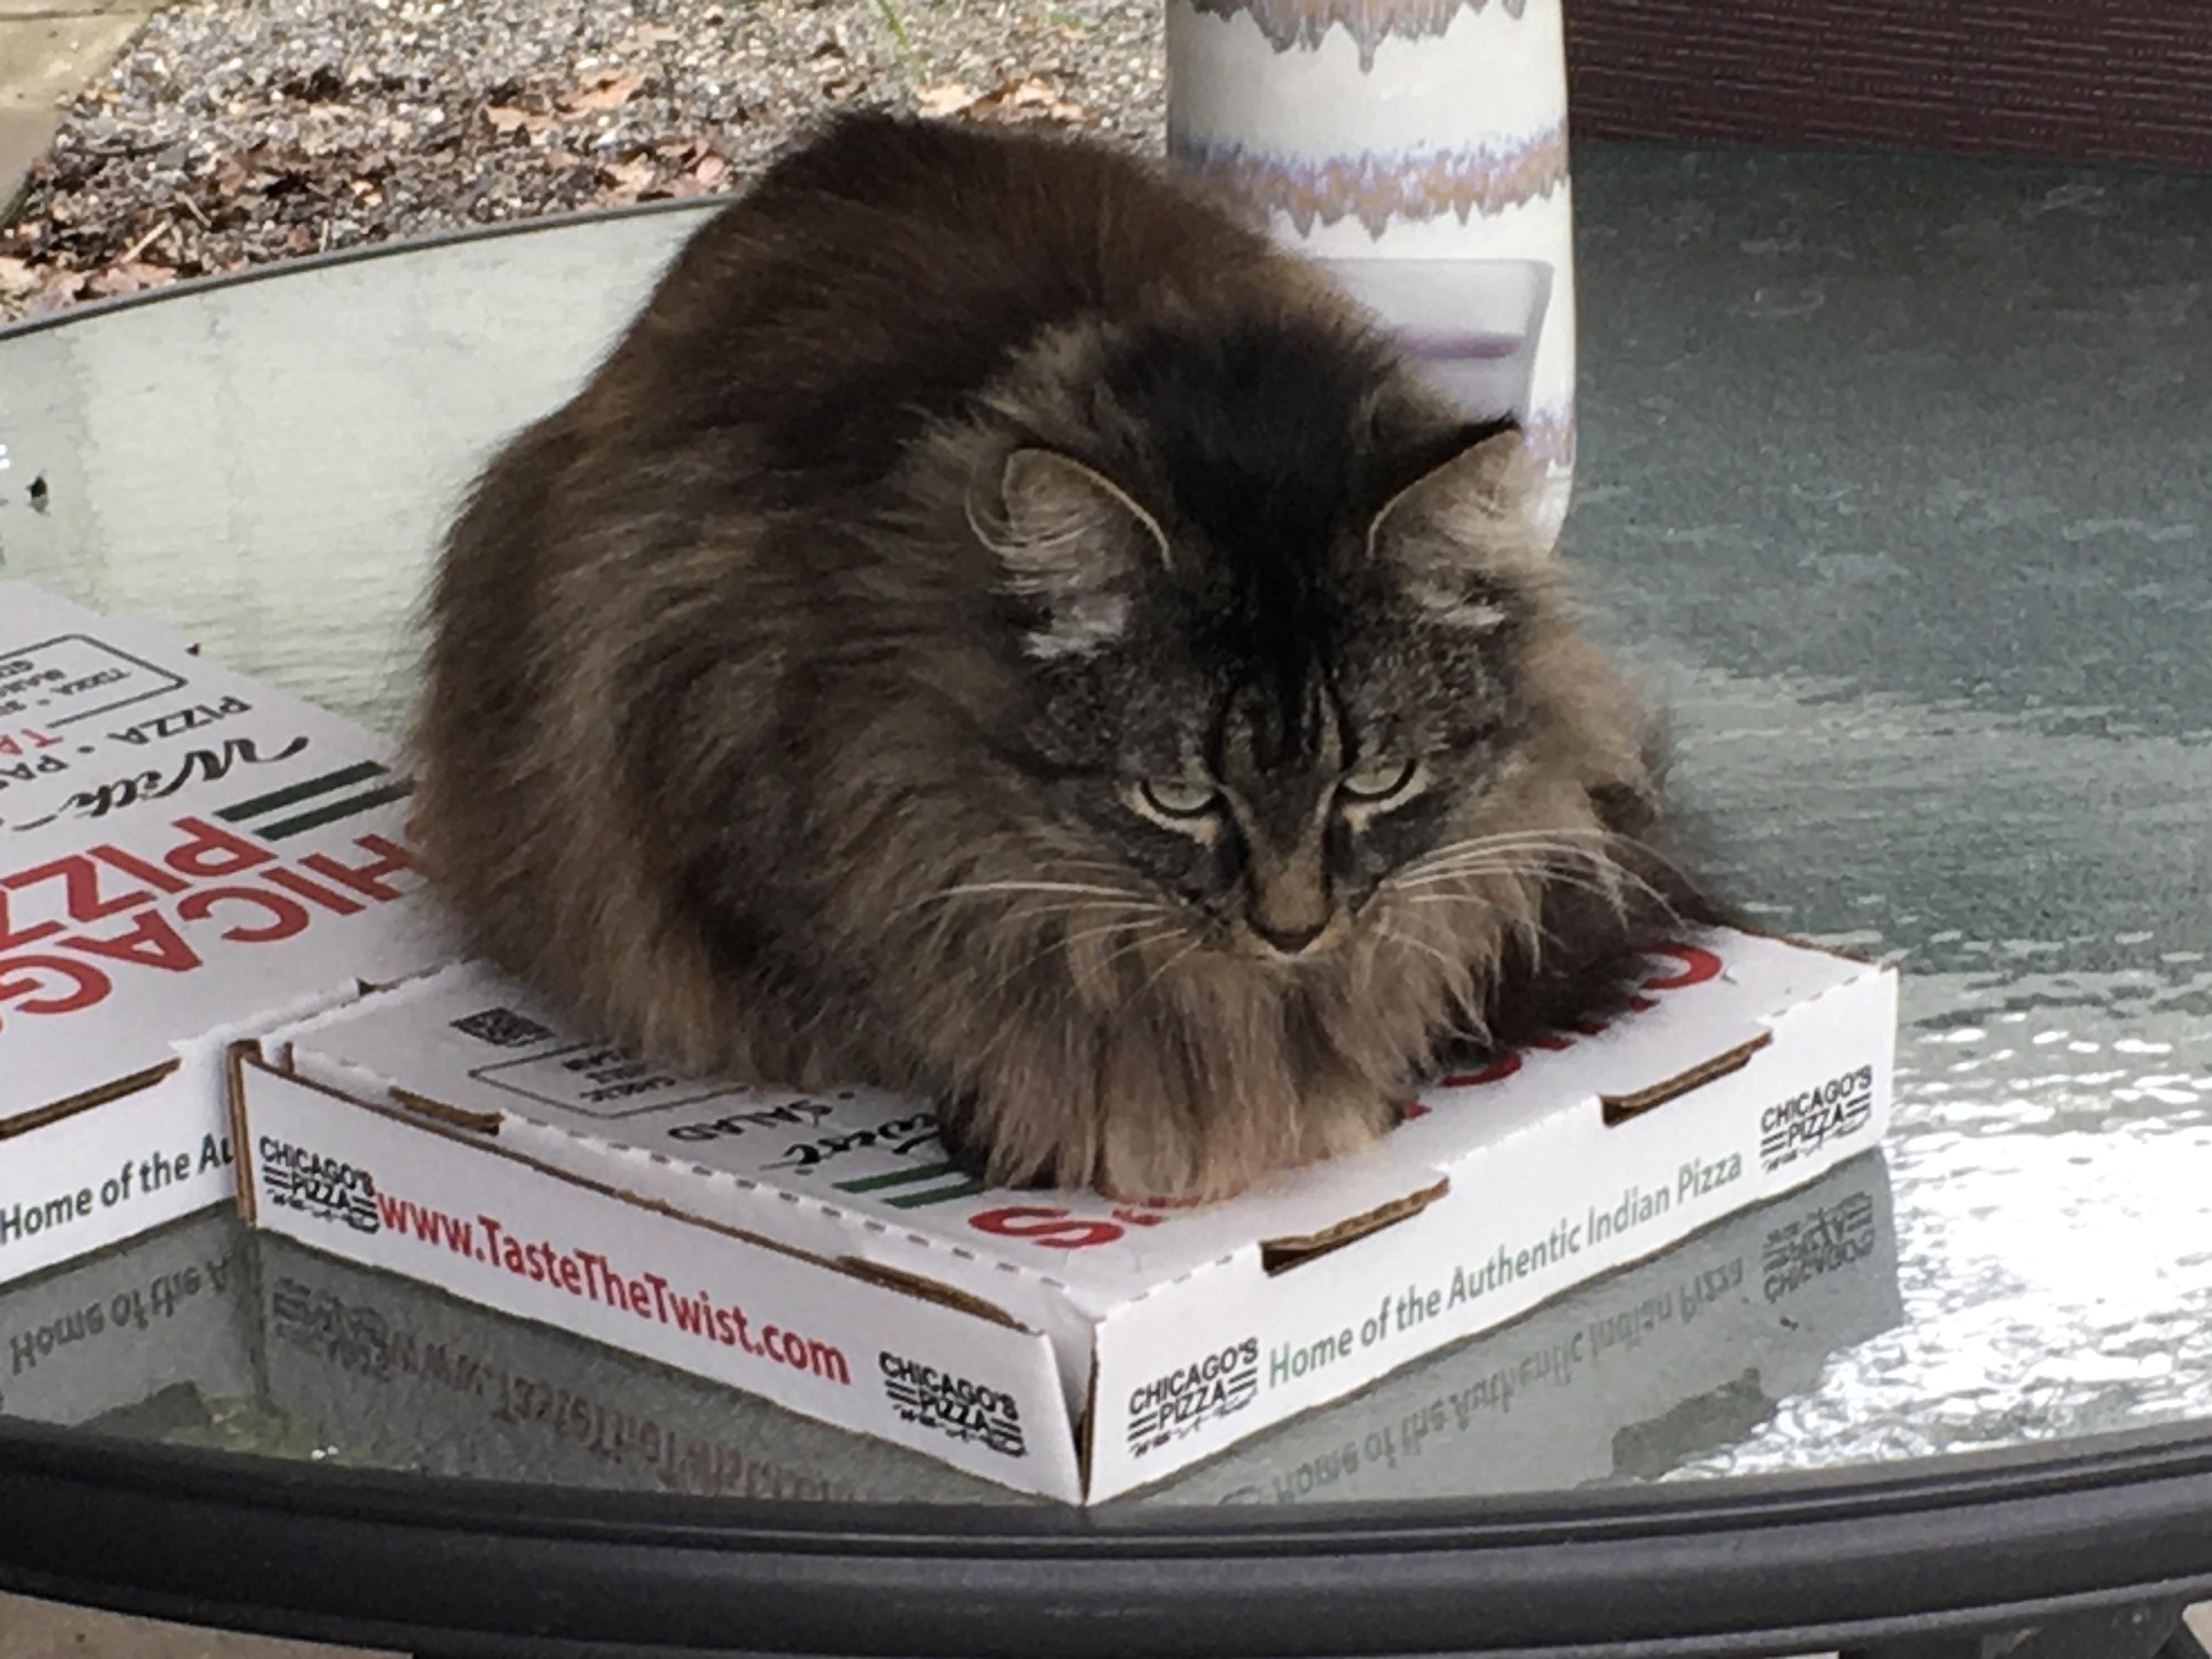 I had pizza delivered, I set it down on my patio table for one minute and came back to this.